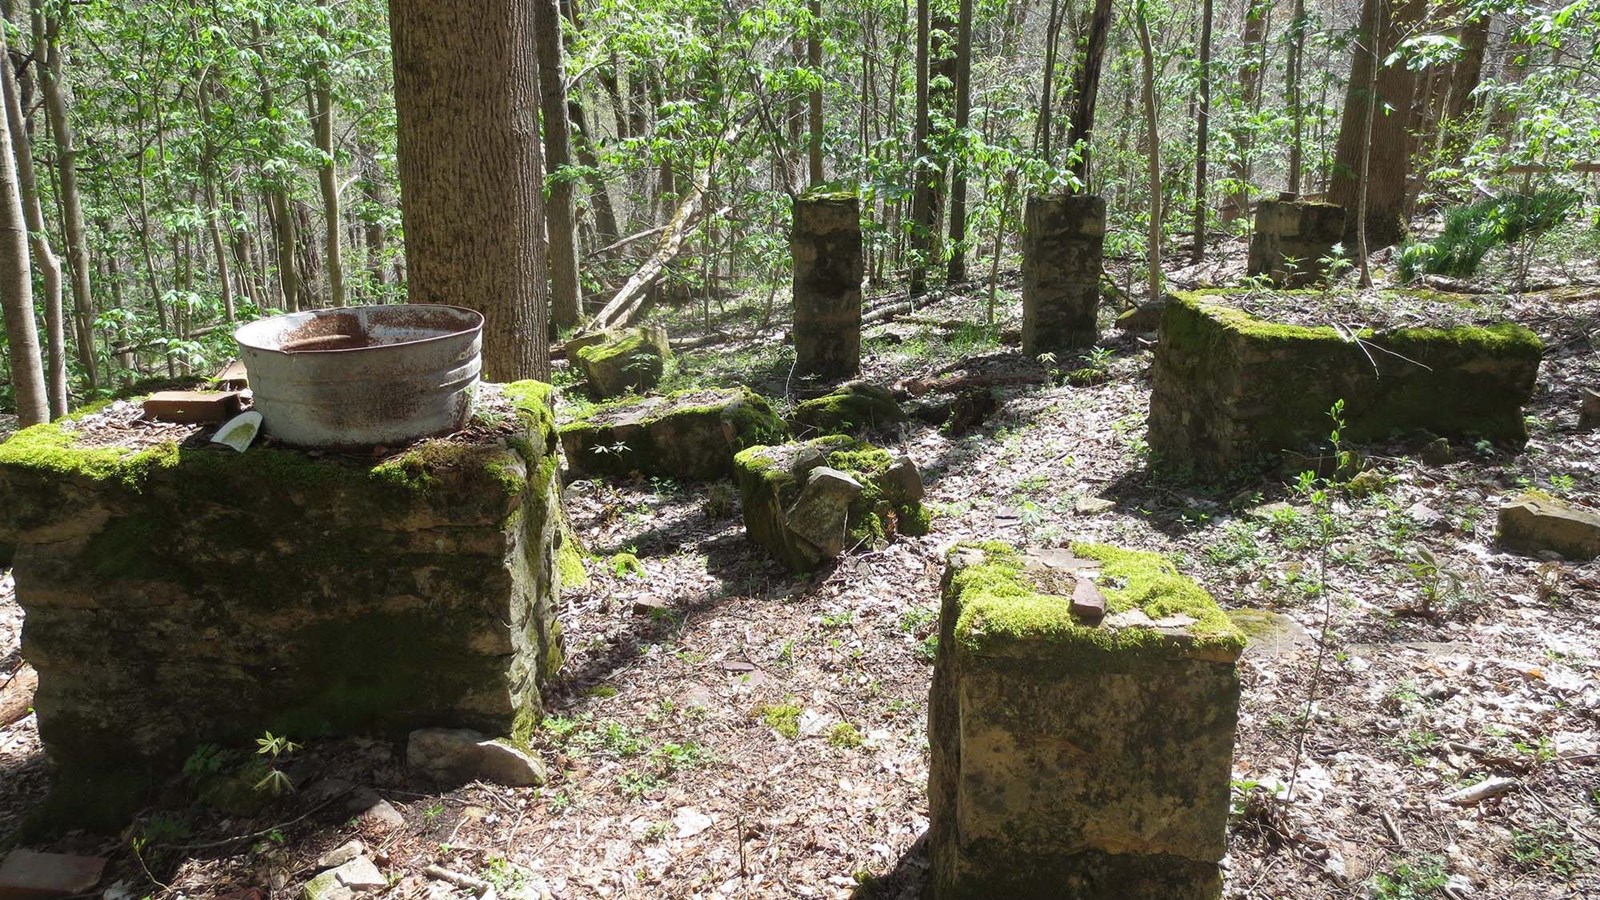 Old stone piers and walls in the forest